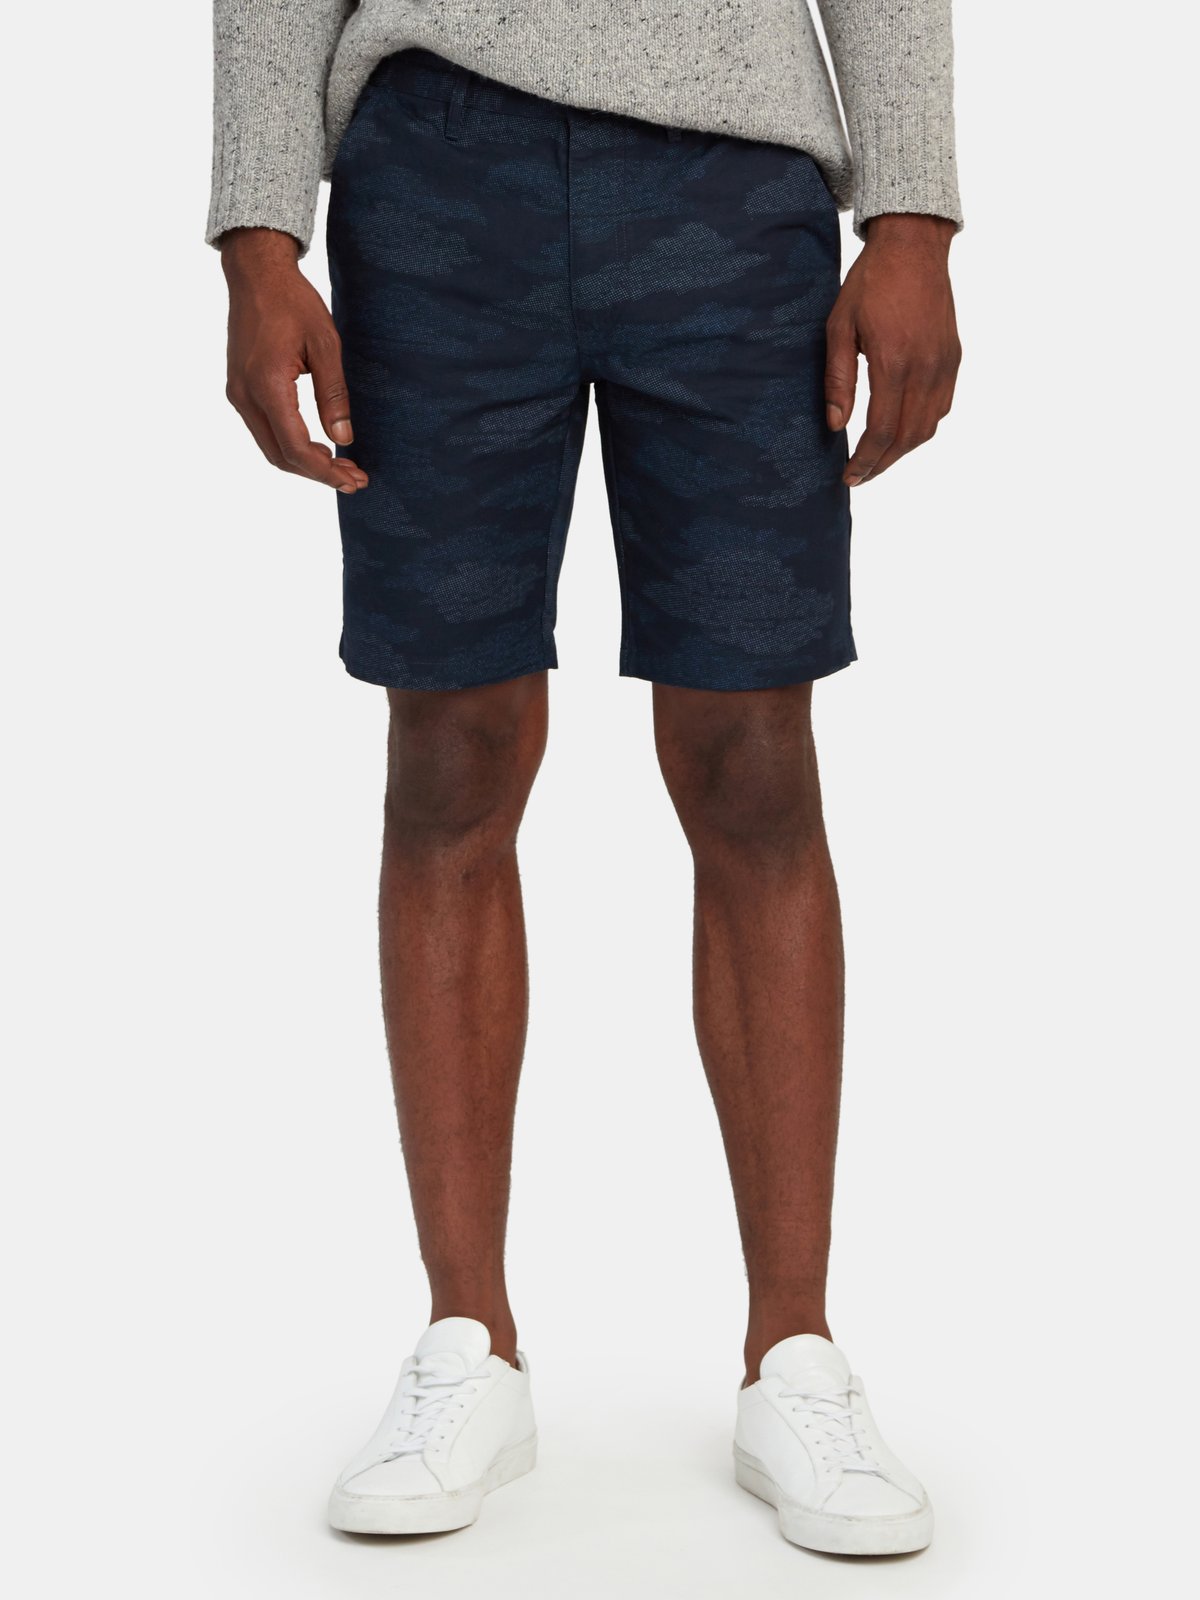 PS by Paul Smith Graphic Shorts | Verishop